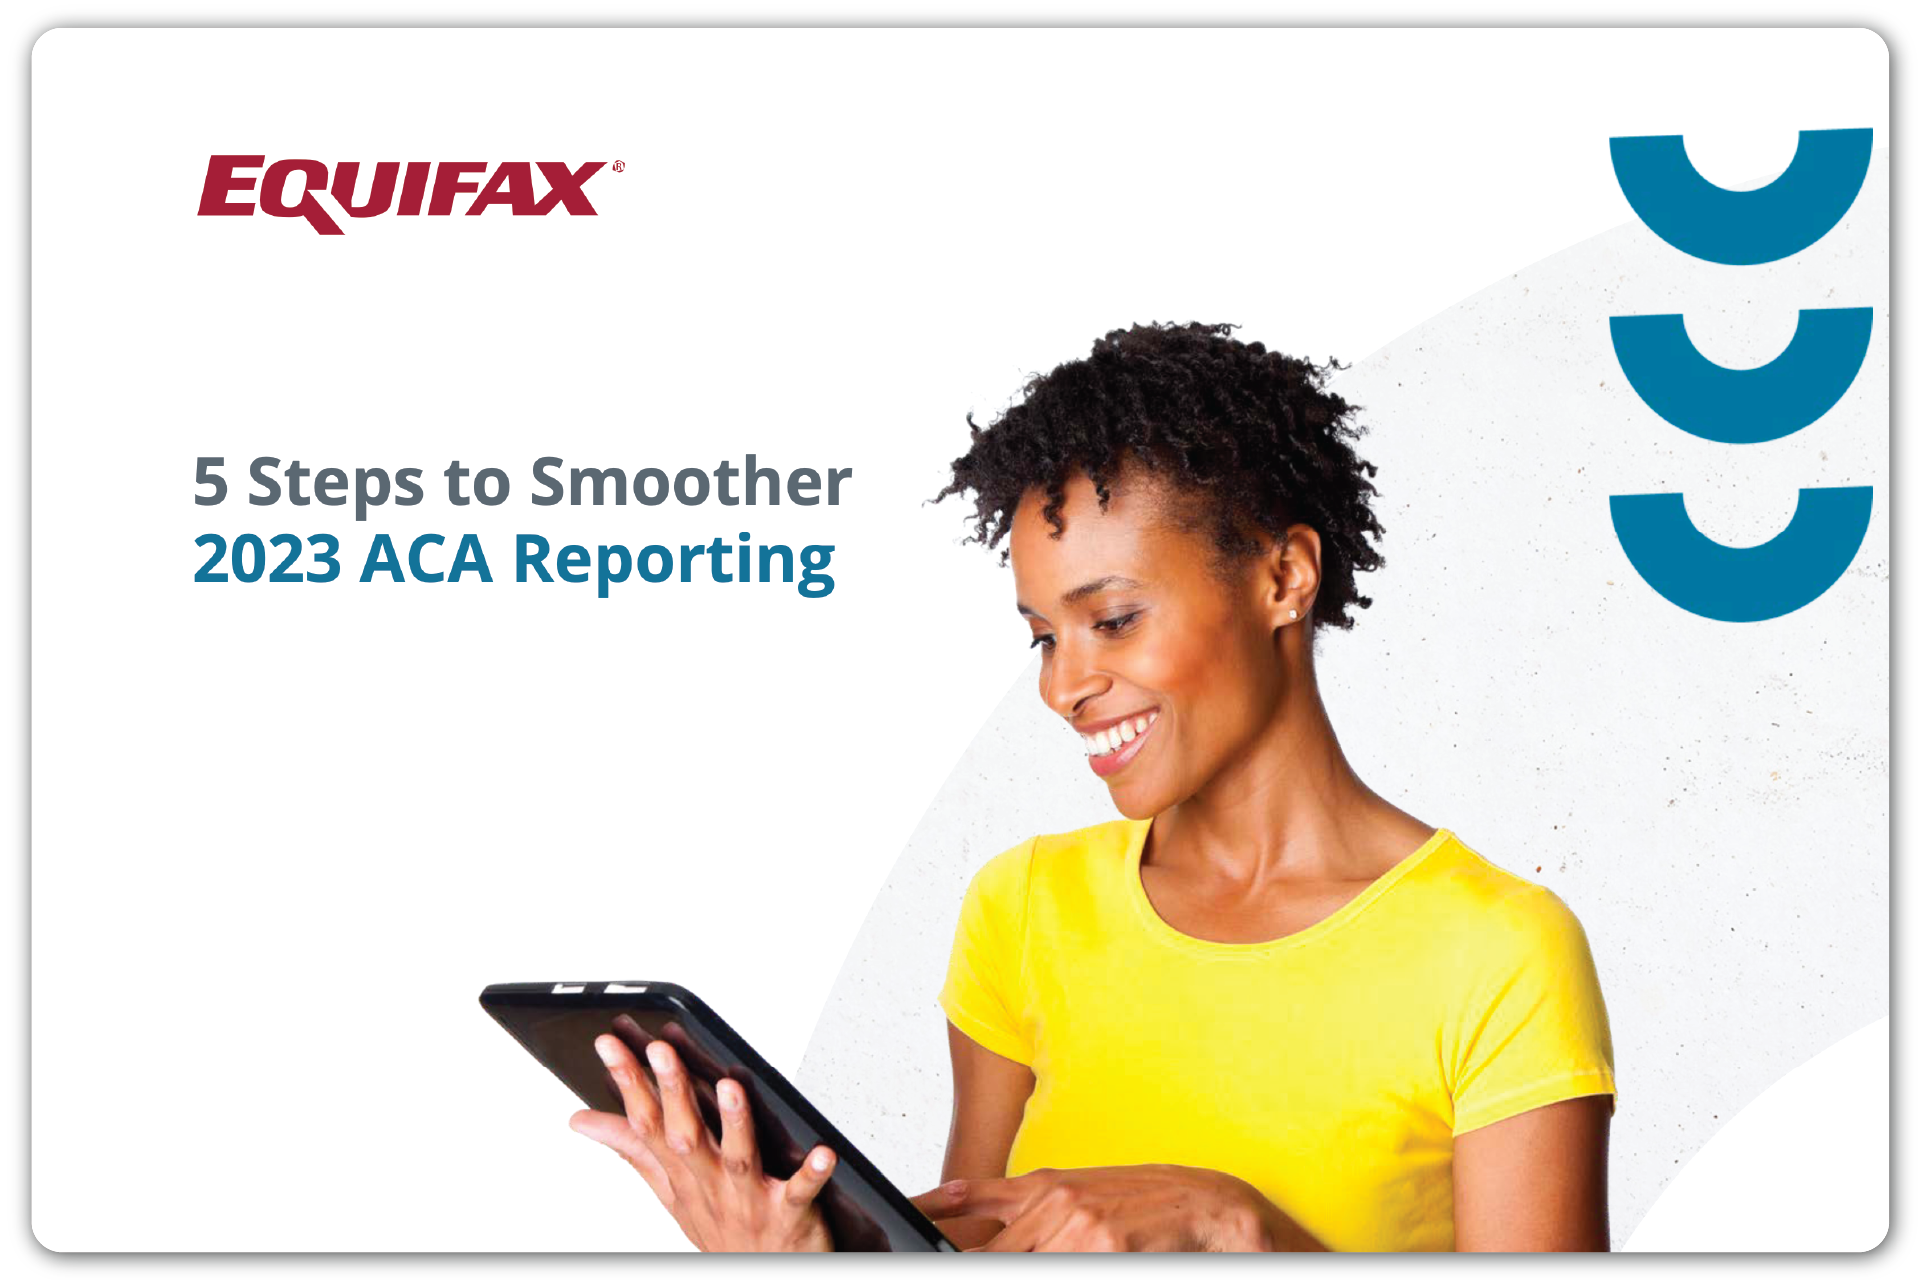 5 Steps to Smoother 2023 ACA Reporting Image